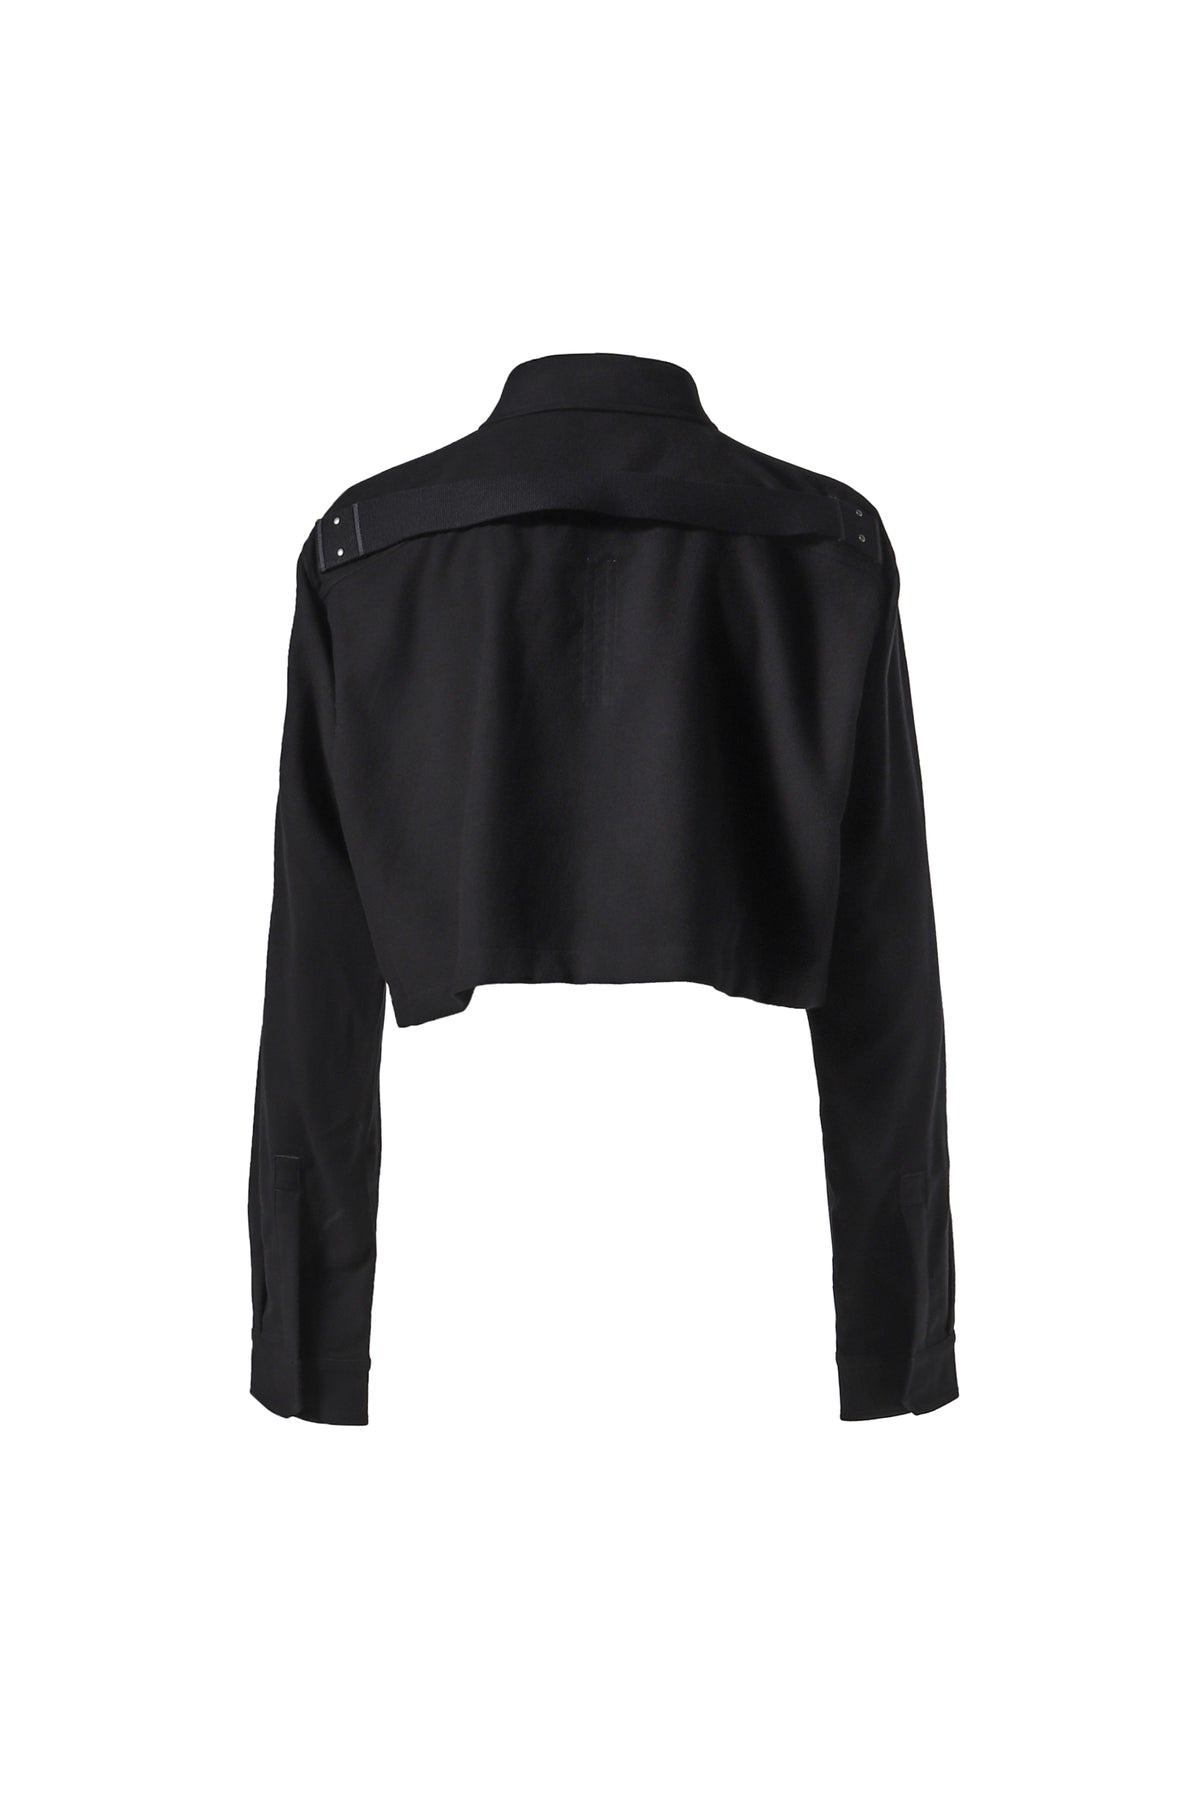 CROPPED OUTERSHIRT  / BLK